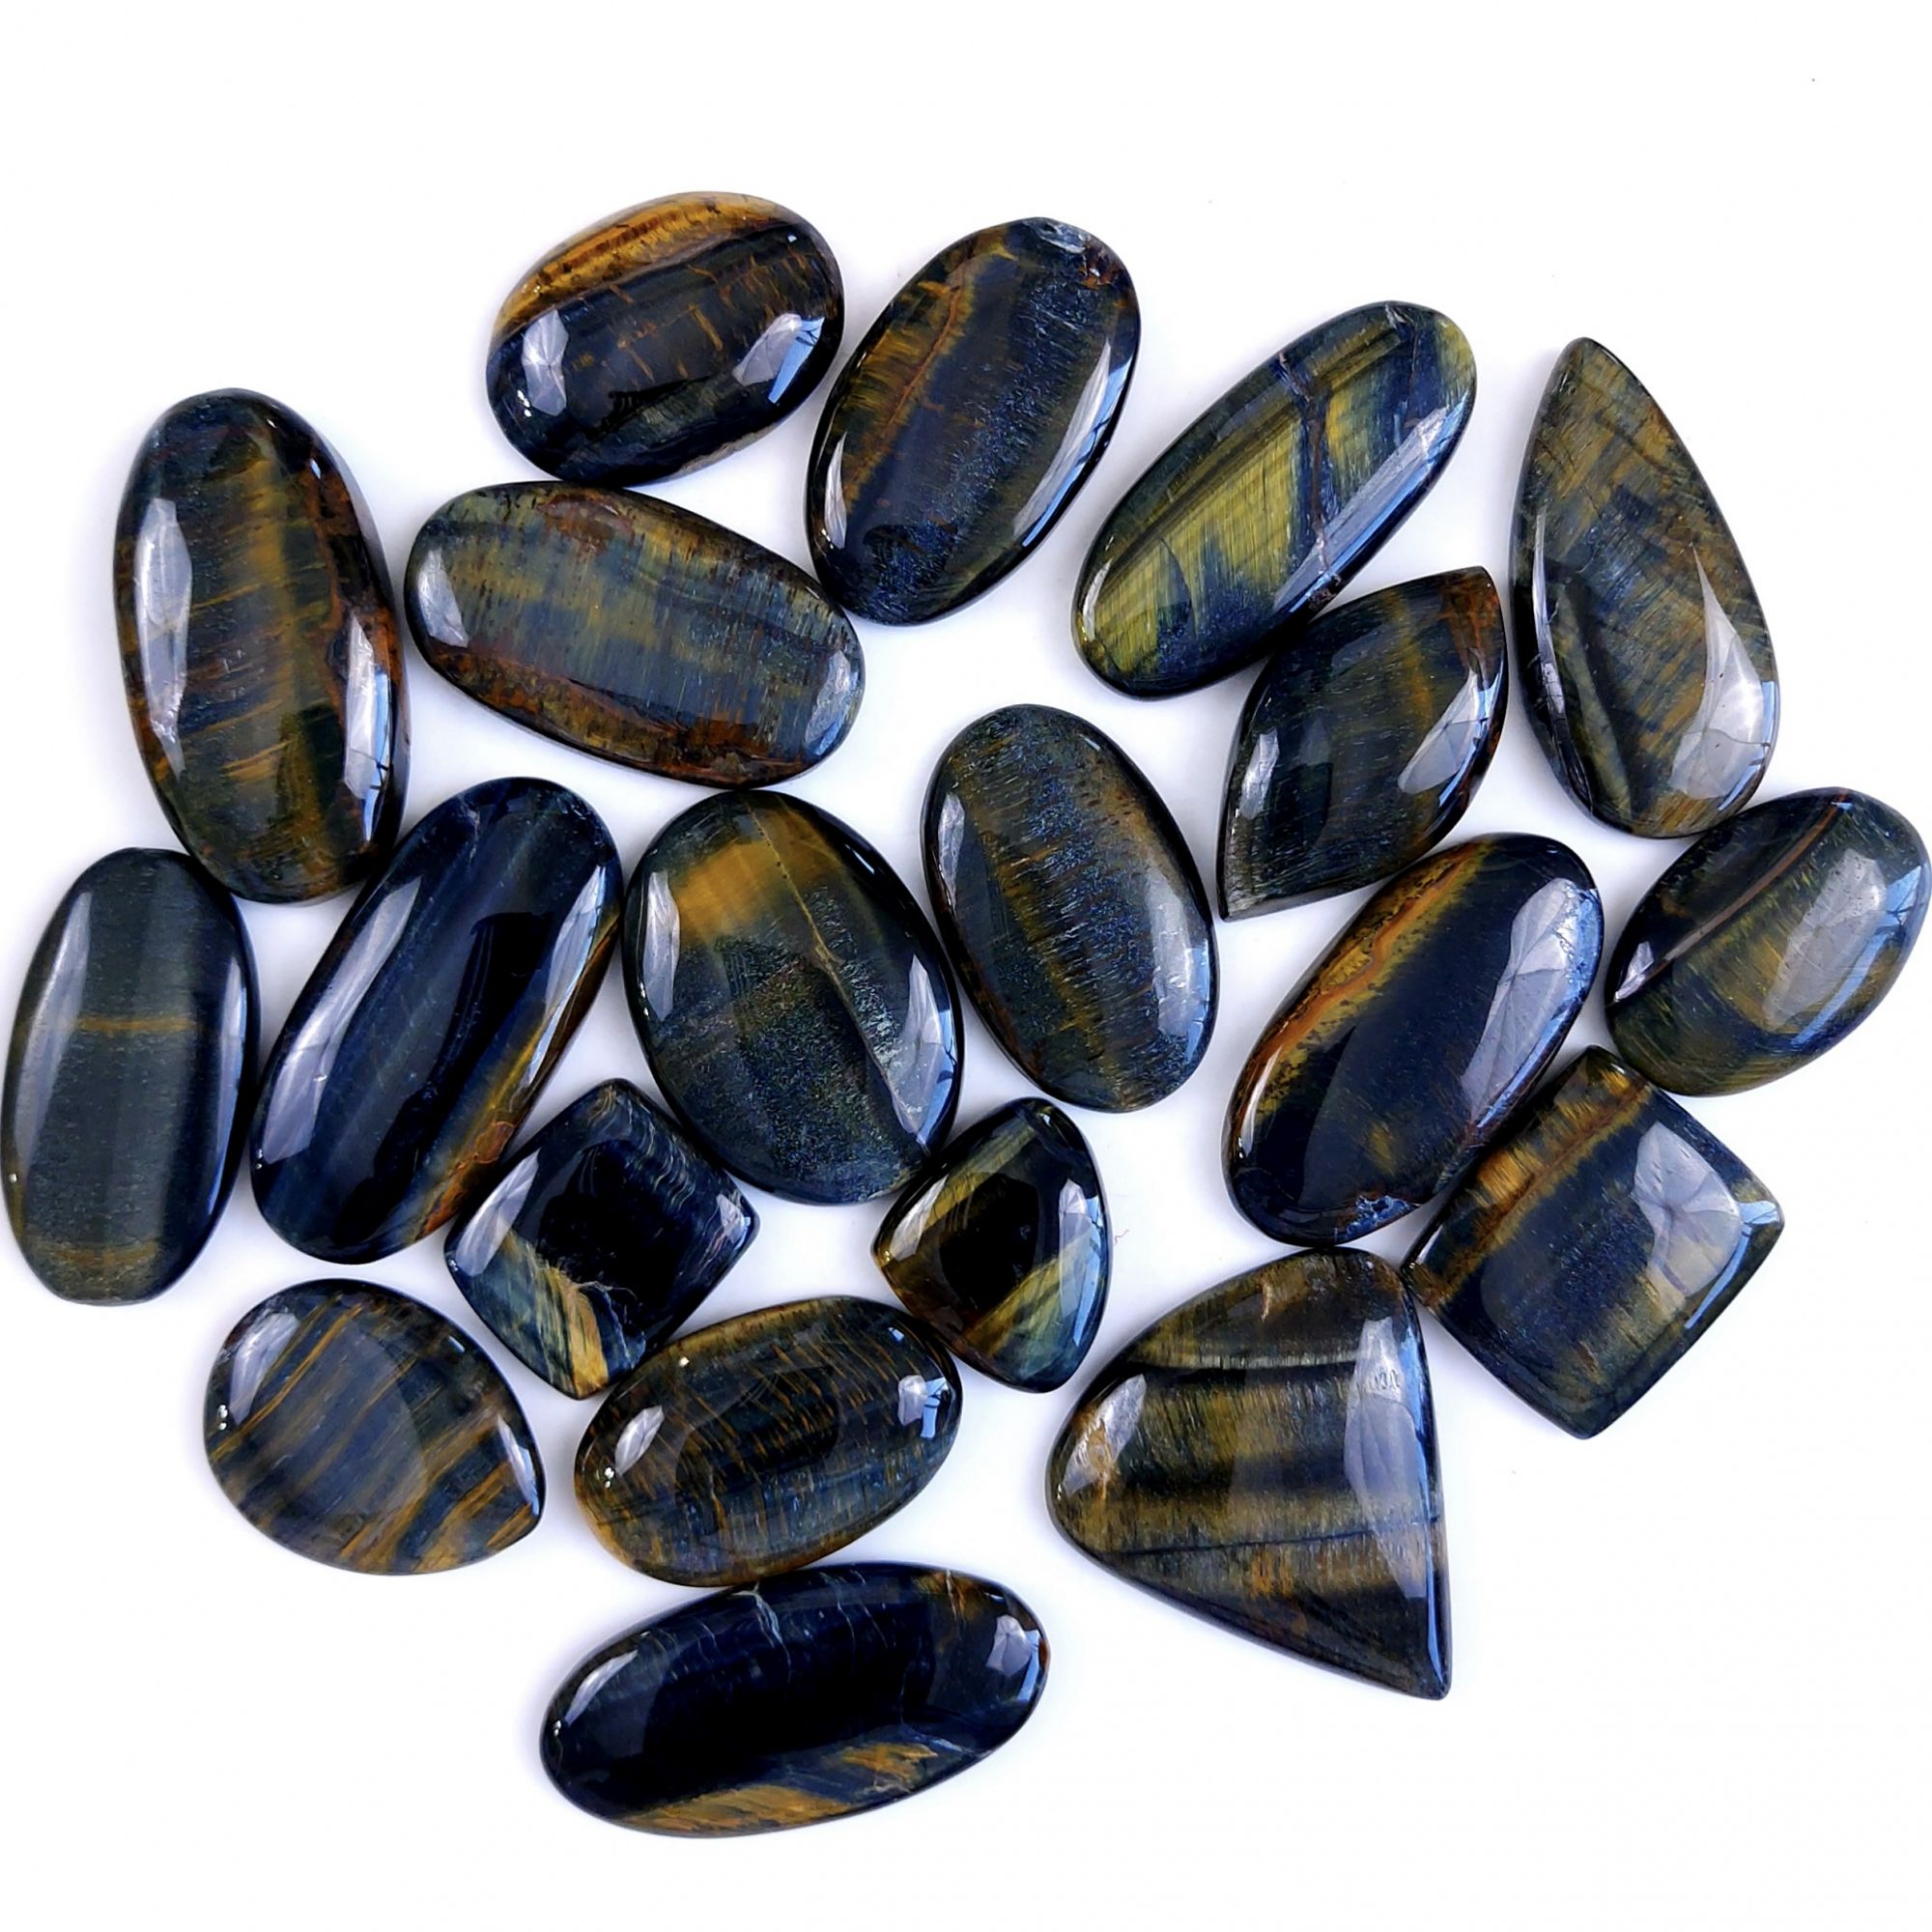 20Pcs 904Cts Natural Tiger Eye Loose Cabochon Gemstone Lot Mix Shape and and Size for Jewelry Making 45x20 30x20mm#1309